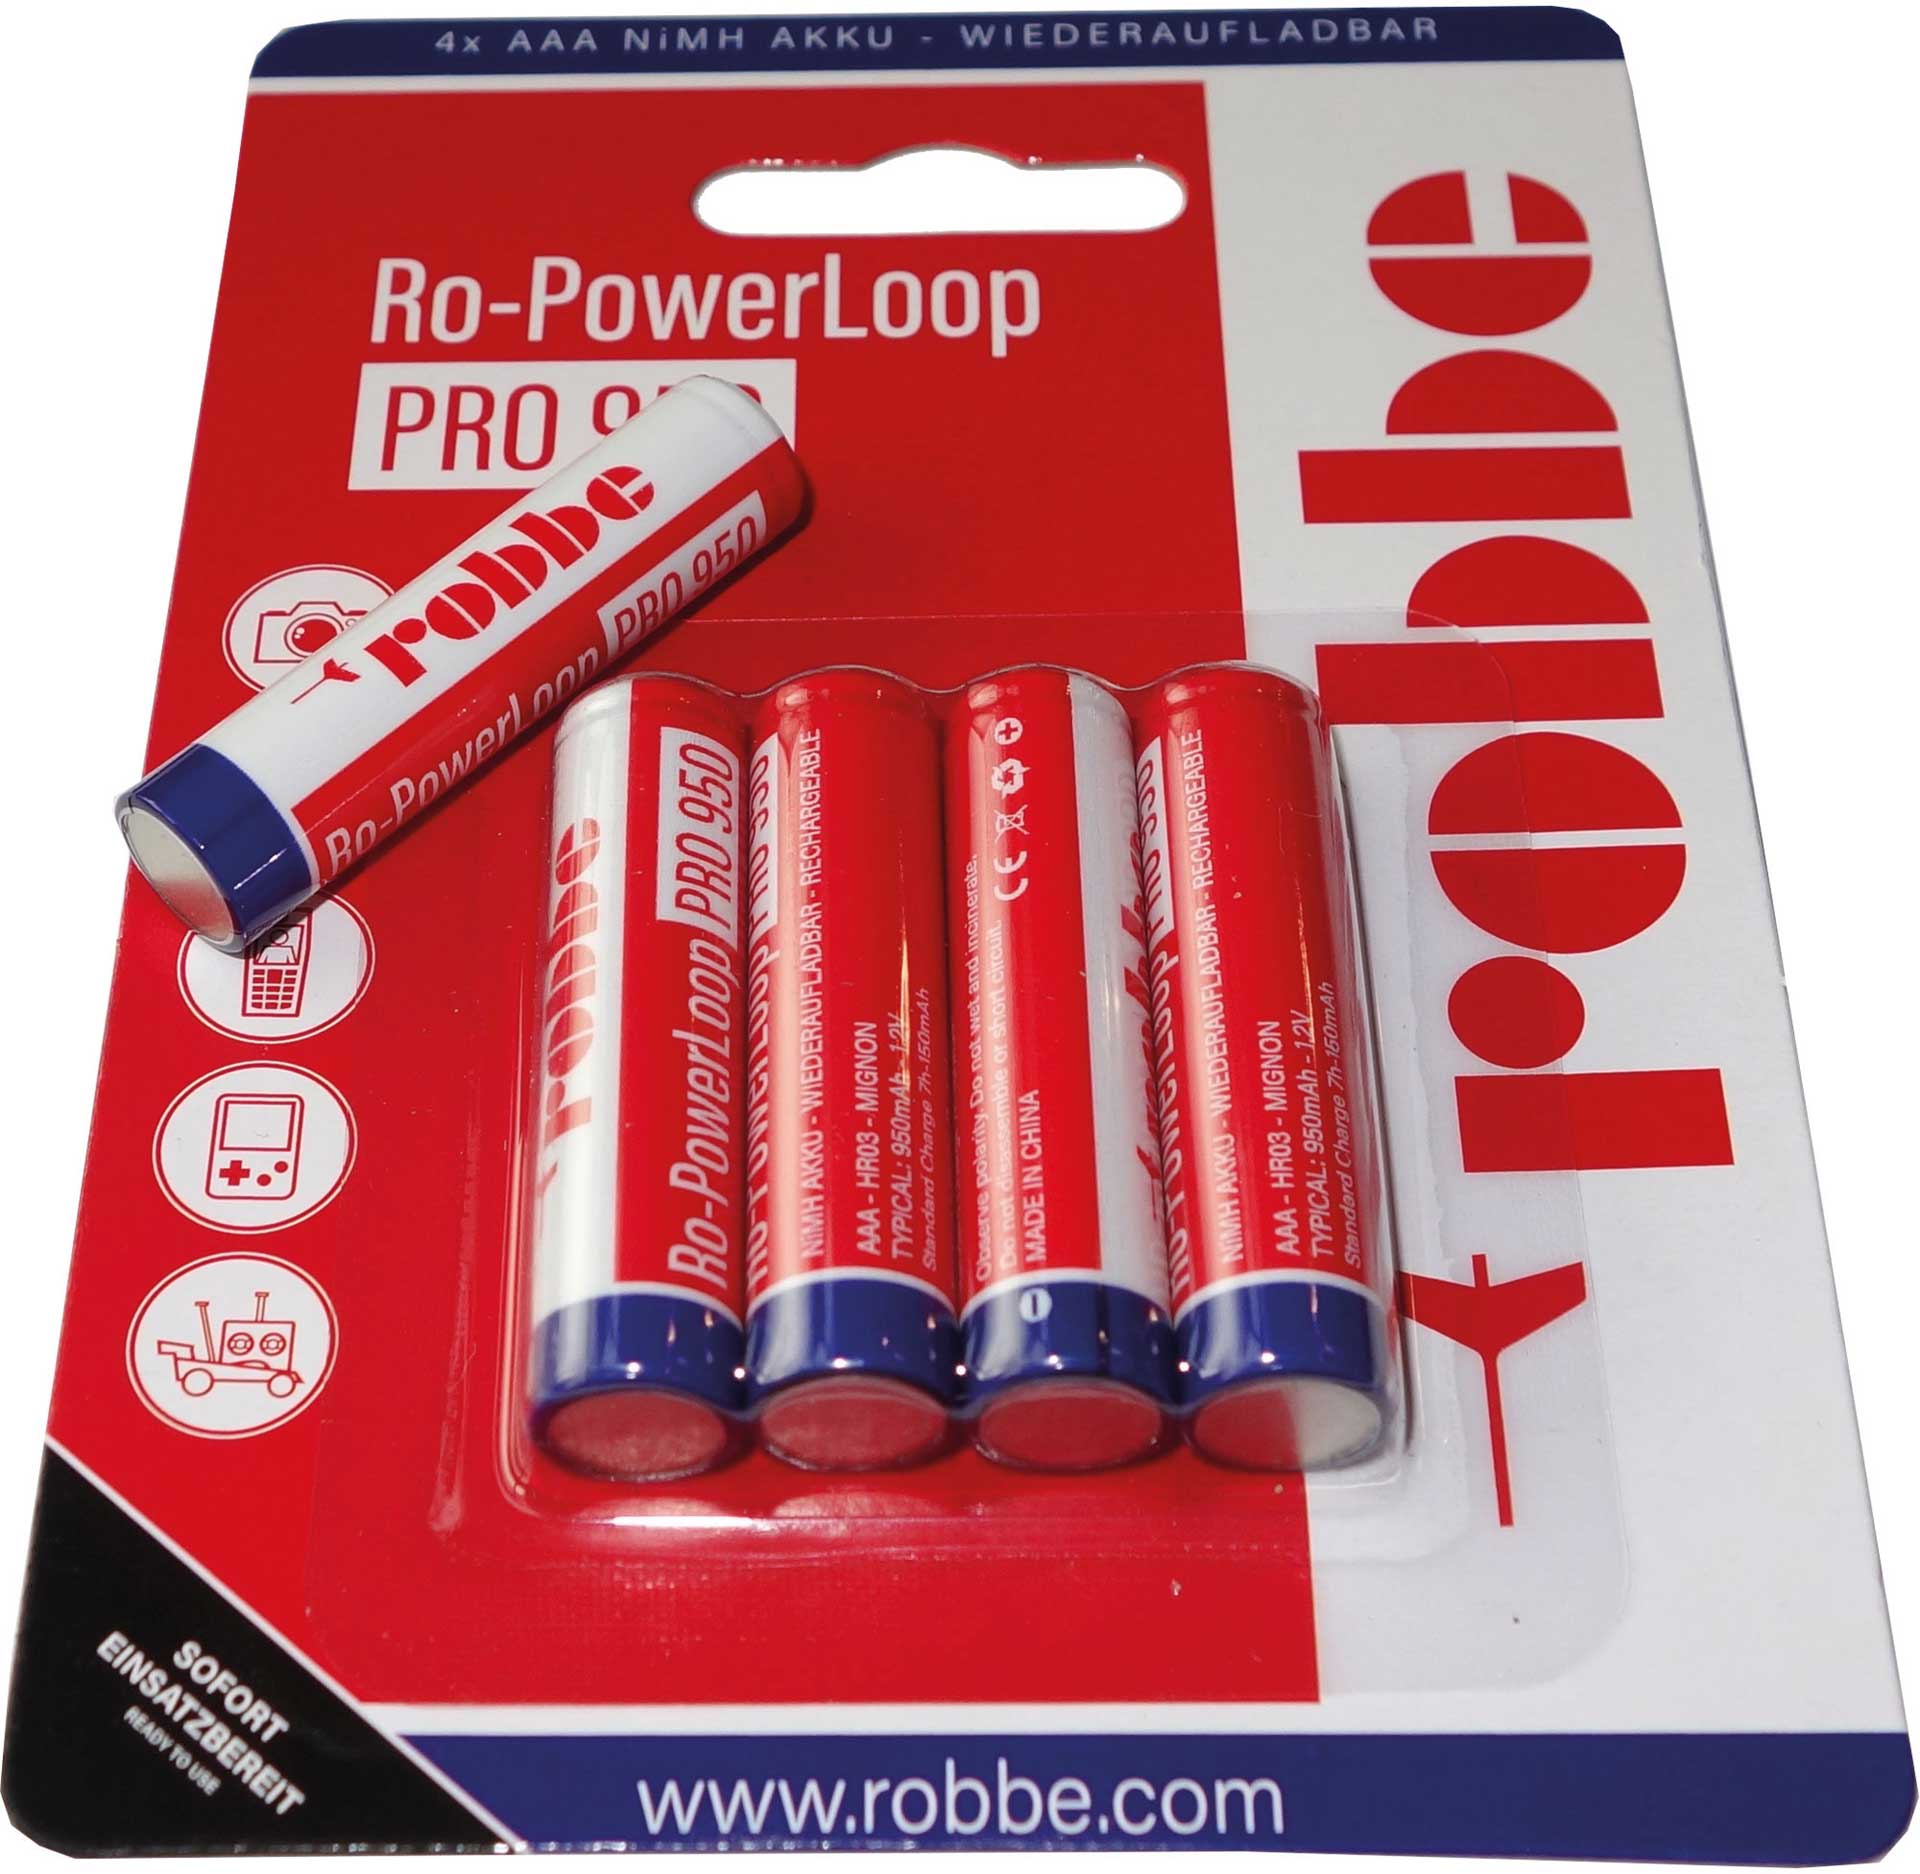 Robbe Modellsport RO-POWER LOOP MICRO AAA 950 MAH 1,2 VOLT 4 PIÈCES SOUS BLISTER